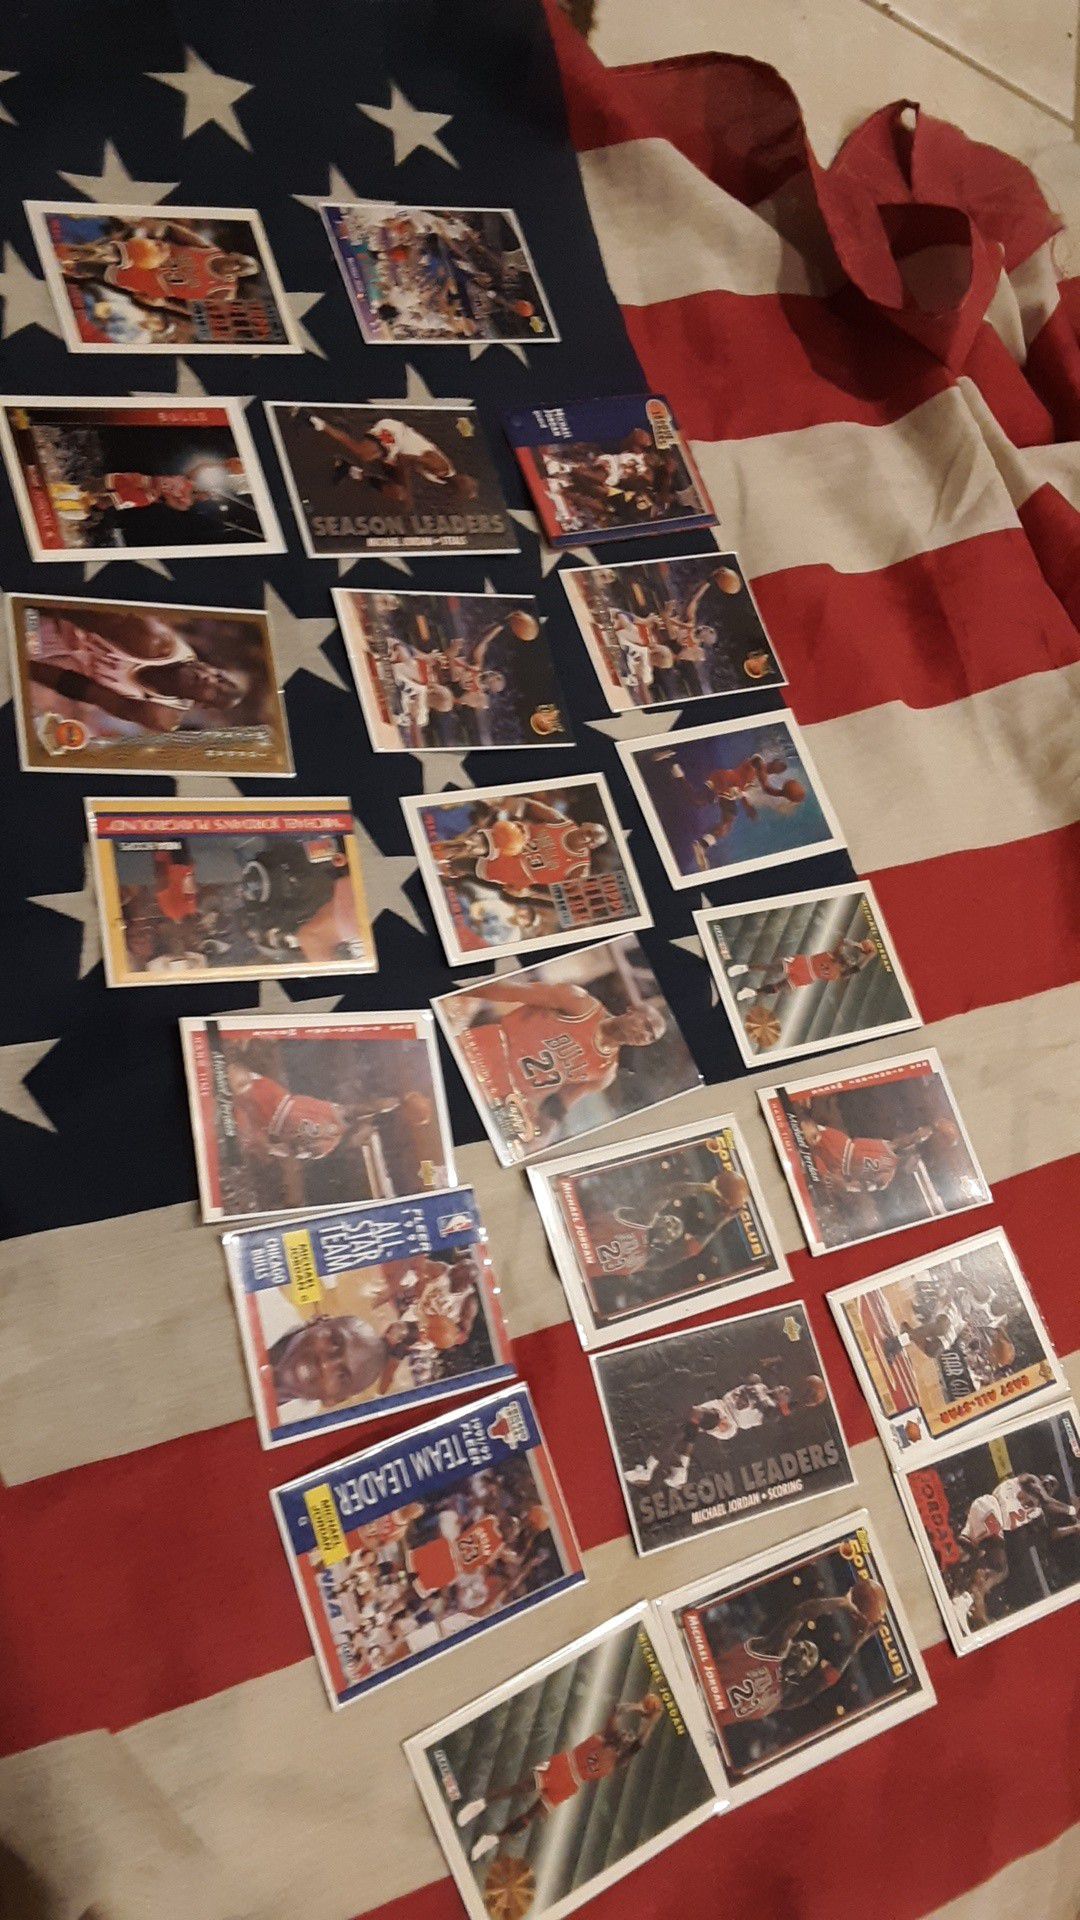 23 Michael Jordan cards sleeved and in great condition.